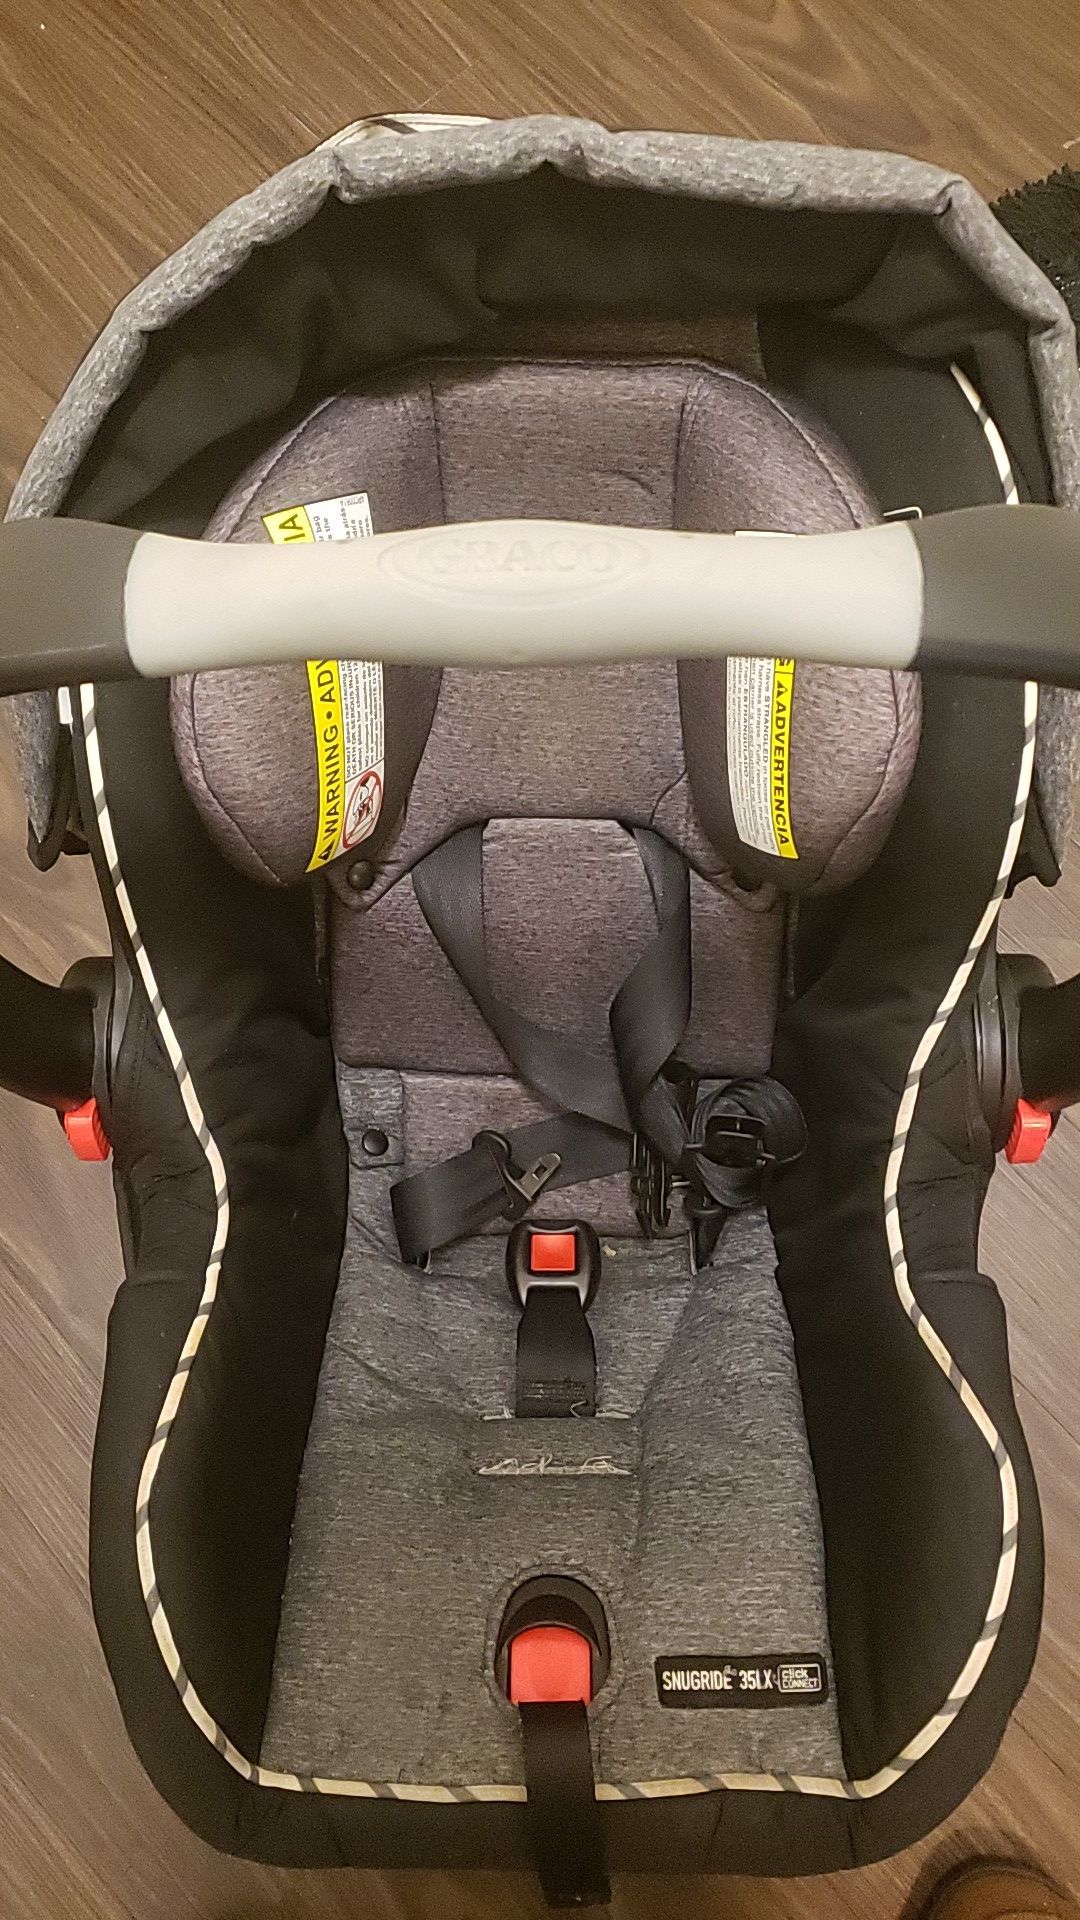 Baby car seat in great/clean condition